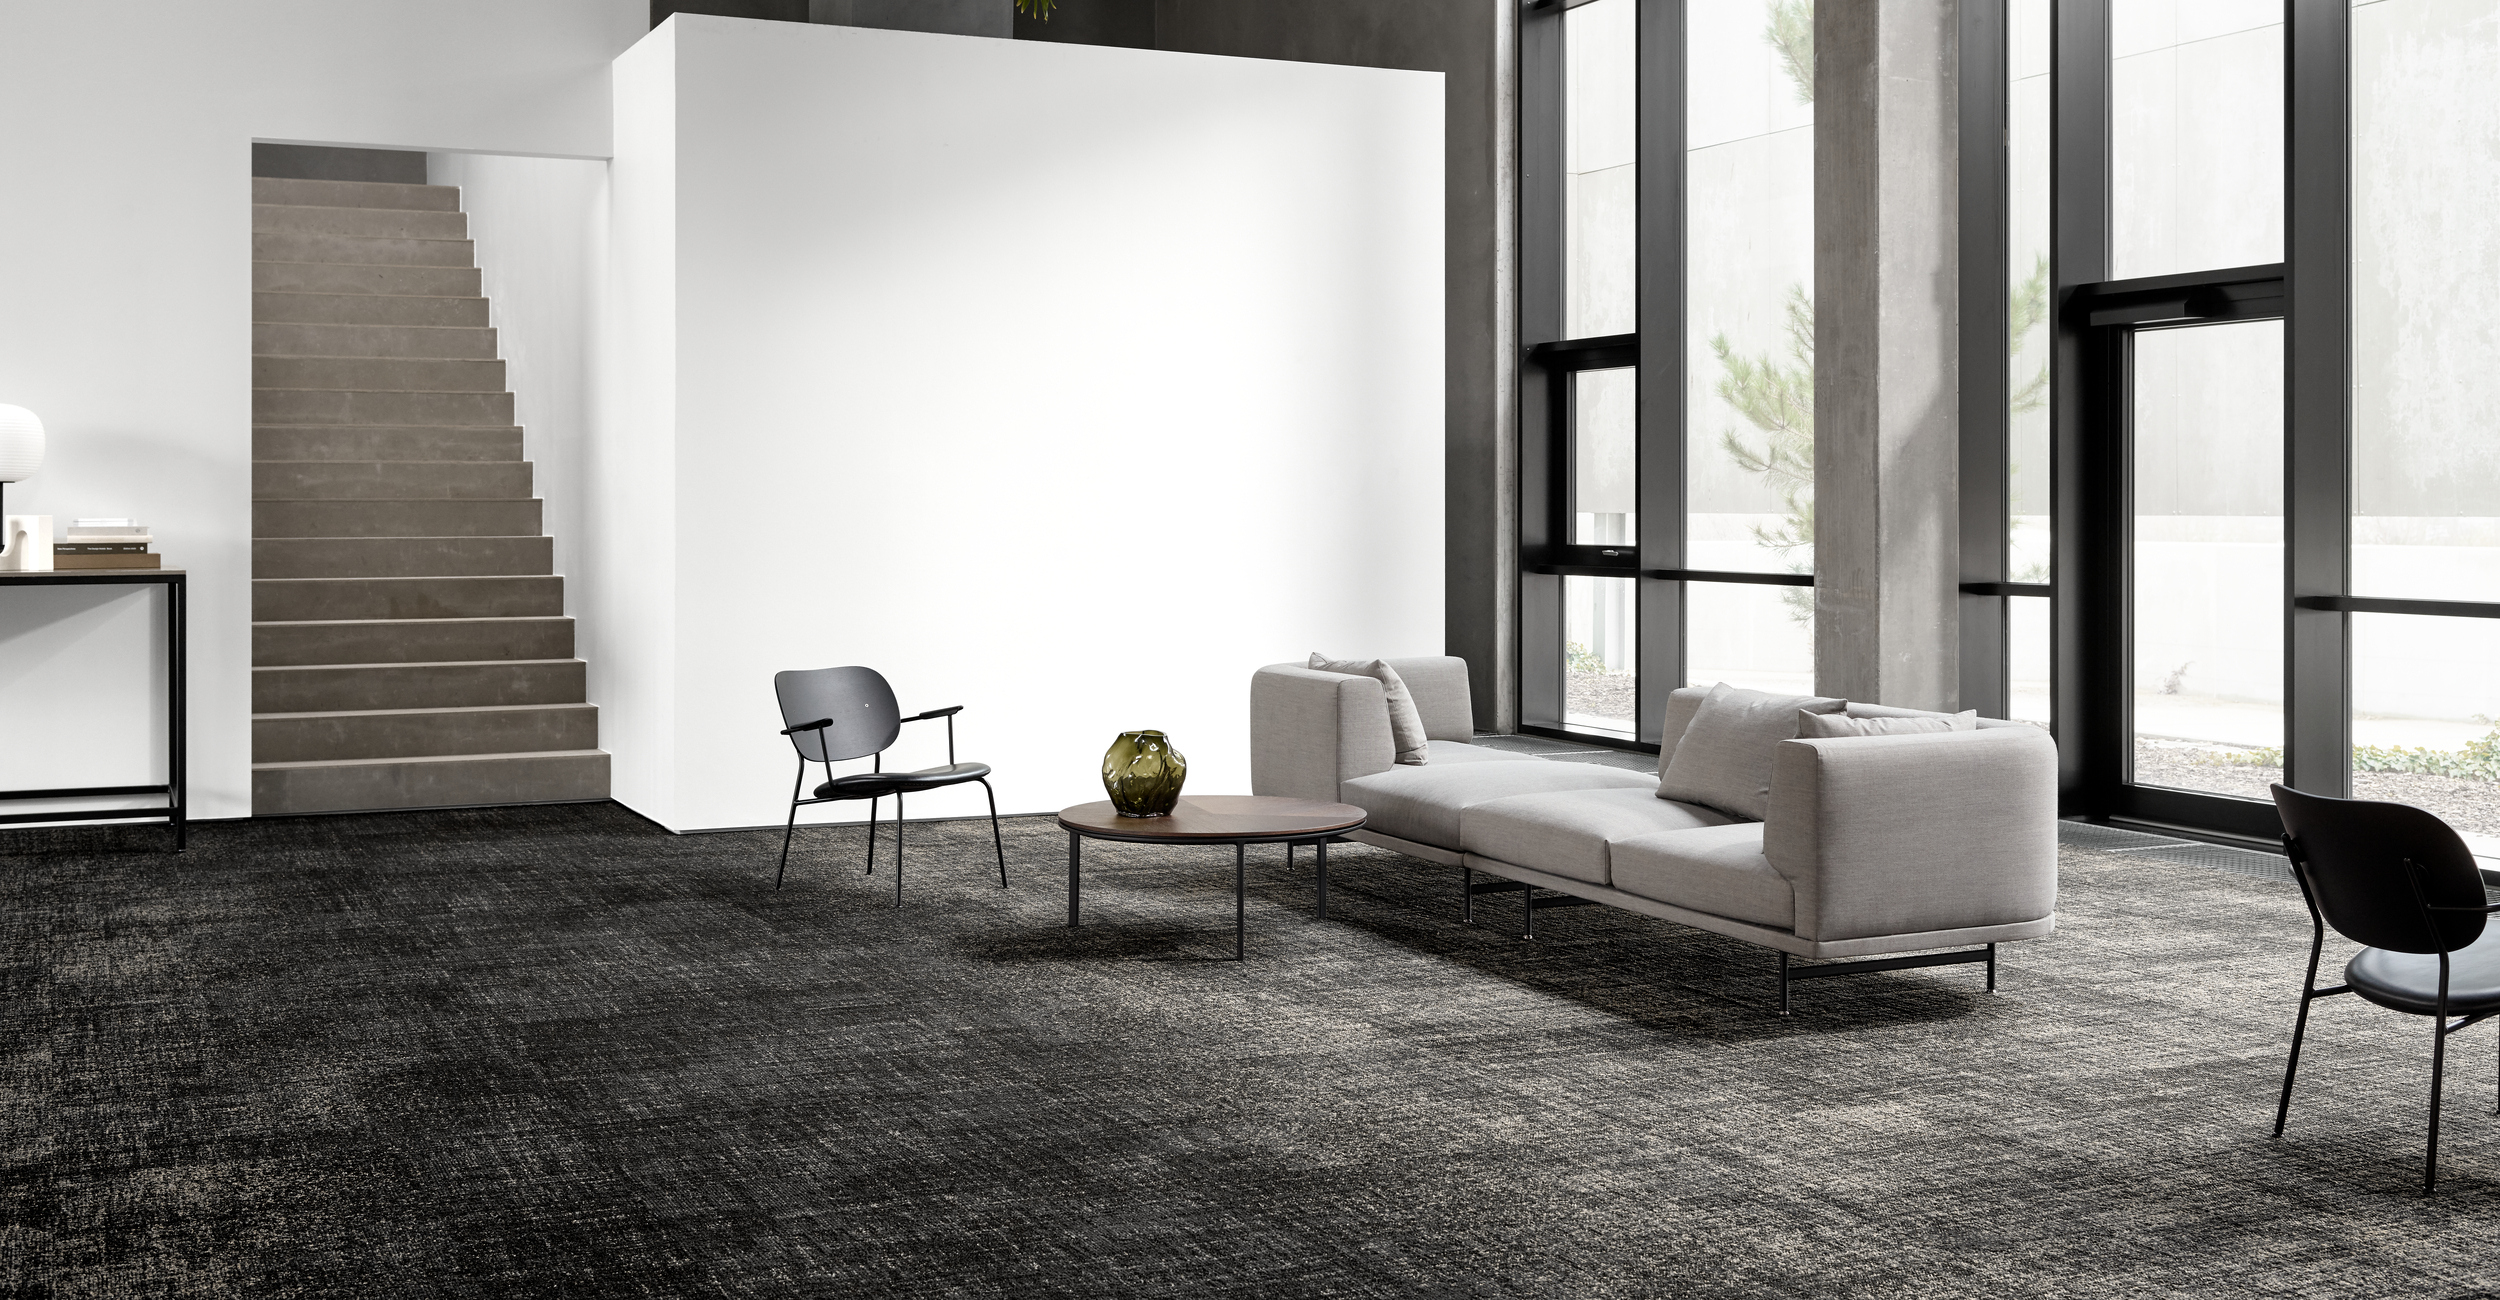 Tappatec Inc. Toronto - Commercial wall-to-wall carpet